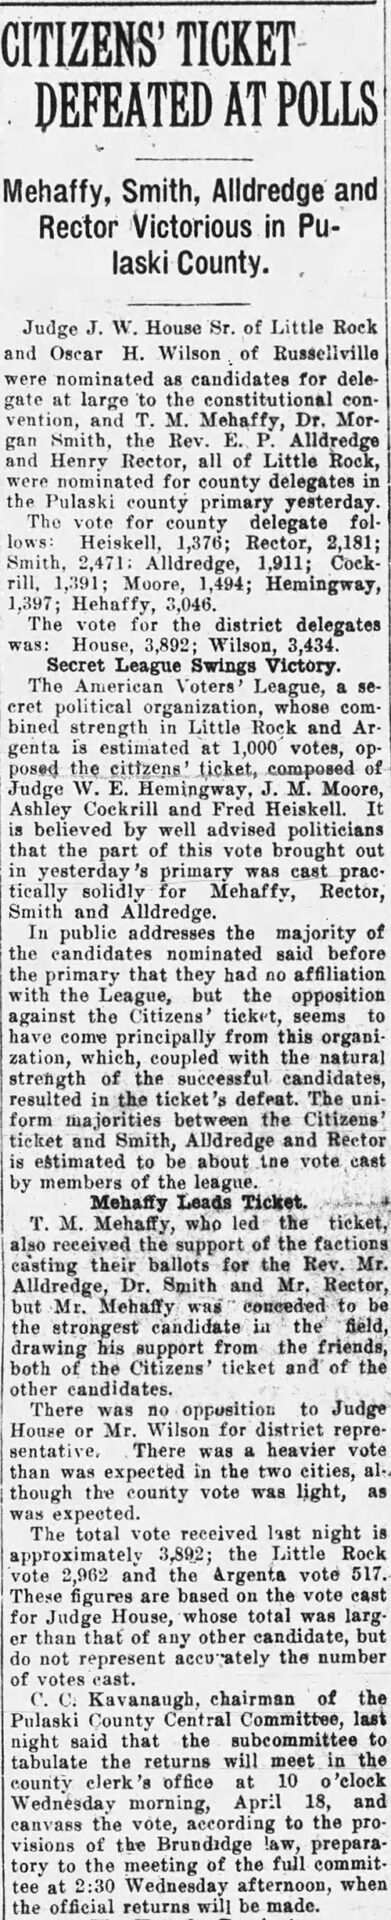 "Citizens' Ticket Defeated at Polls" newspaper clipping